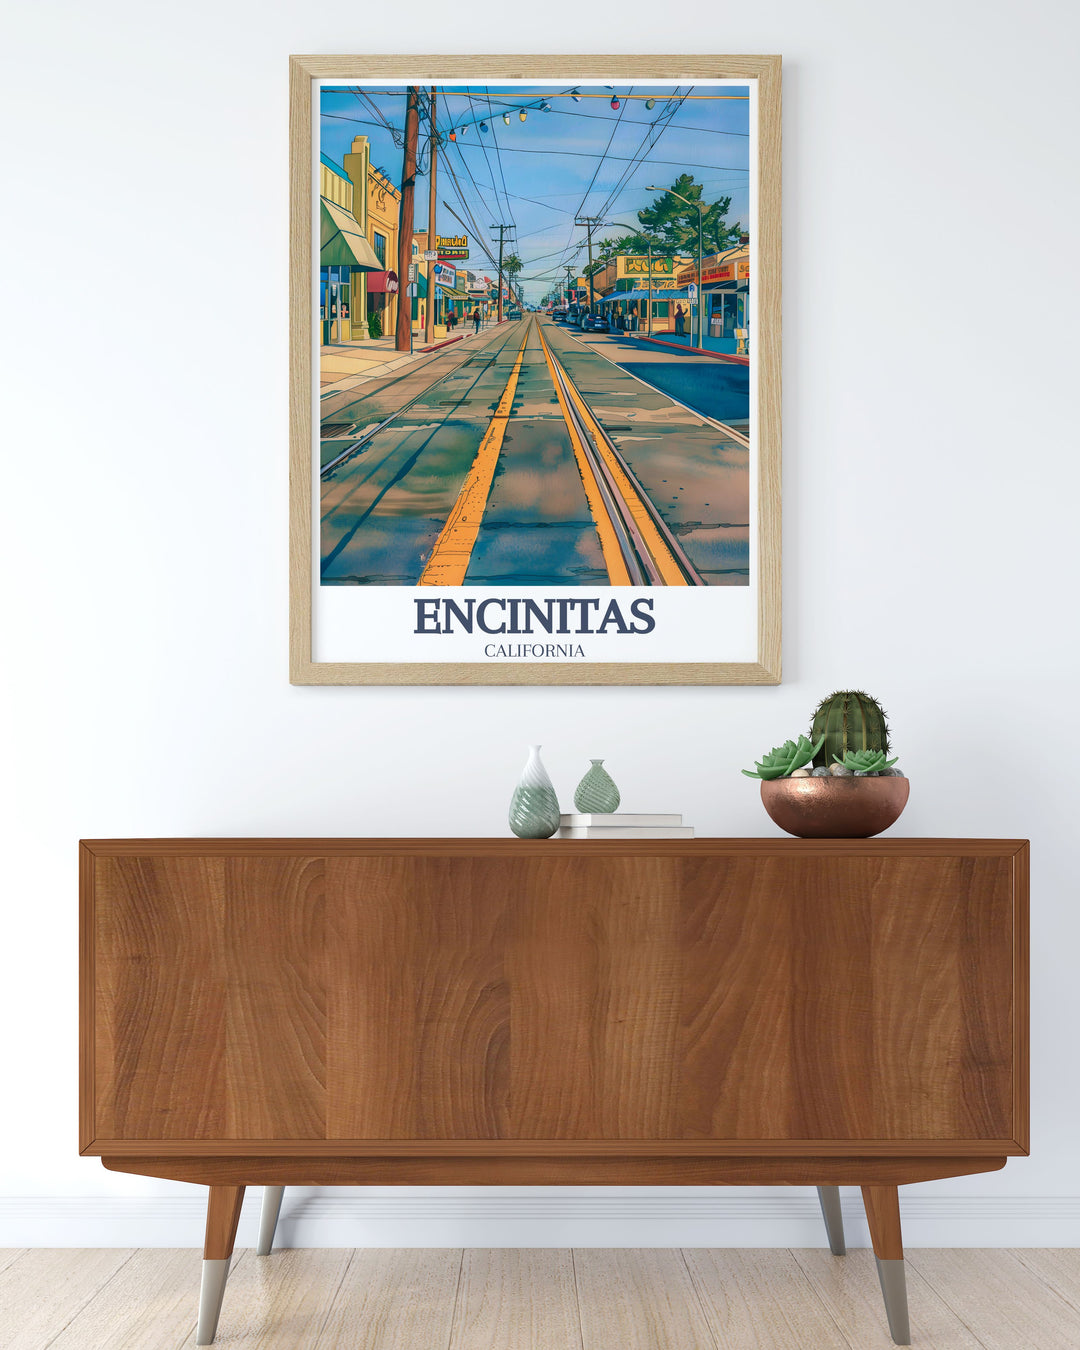 Encinitas city map and skyline poster highlighting Downtown Encinitas Coast Highway 101 offering a beautiful depiction of the towns scenic landmarks perfect for home decor or as a unique travel souvenir